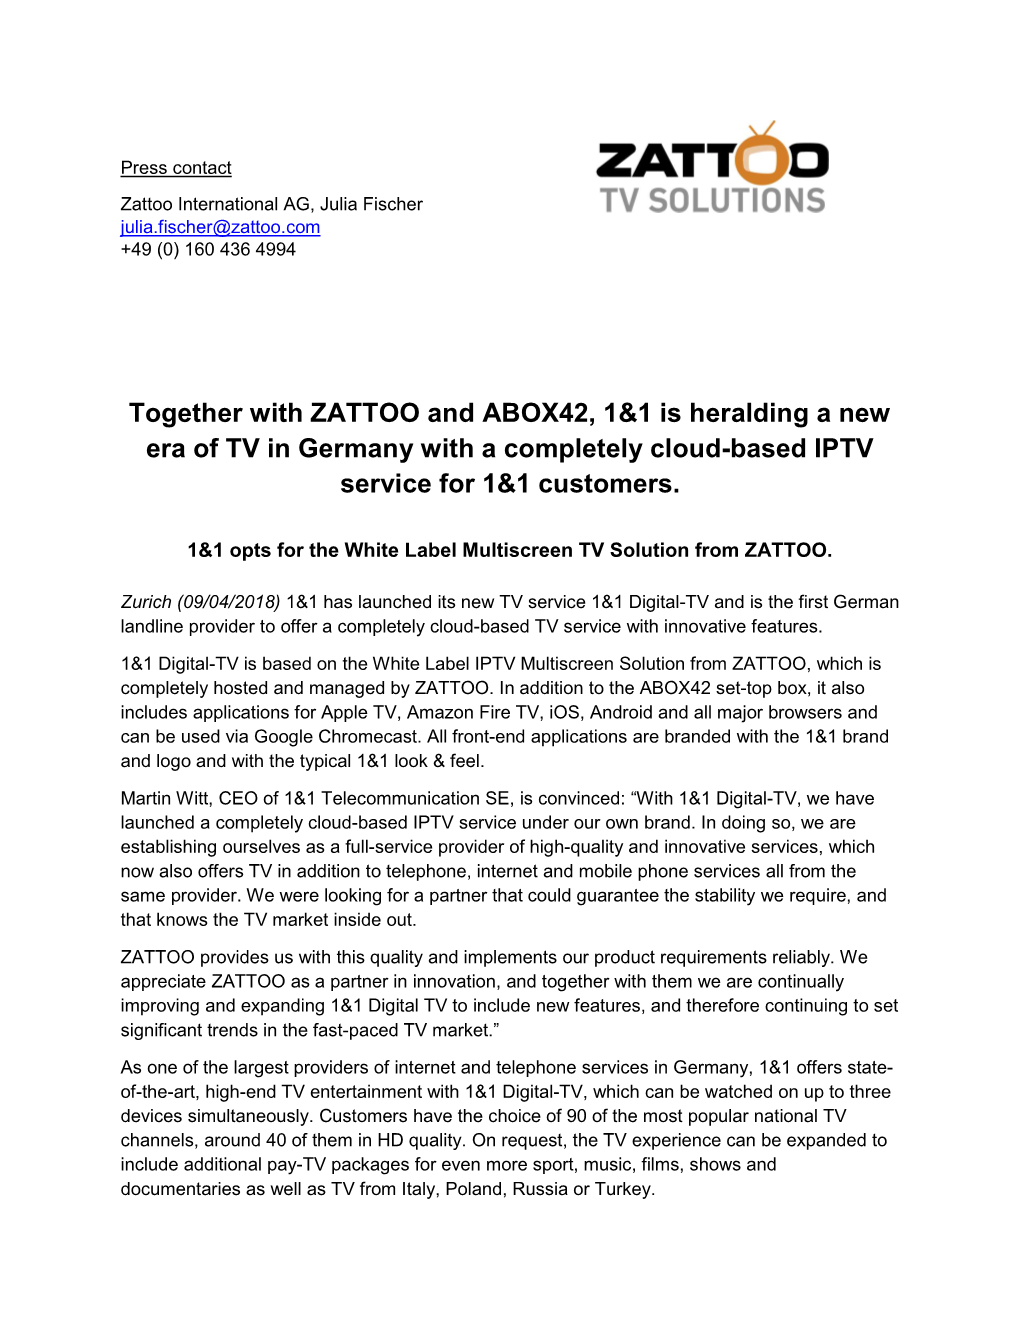 Together with ZATTOO and ABOX42, 1&1 Is Heralding a New Era of TV In